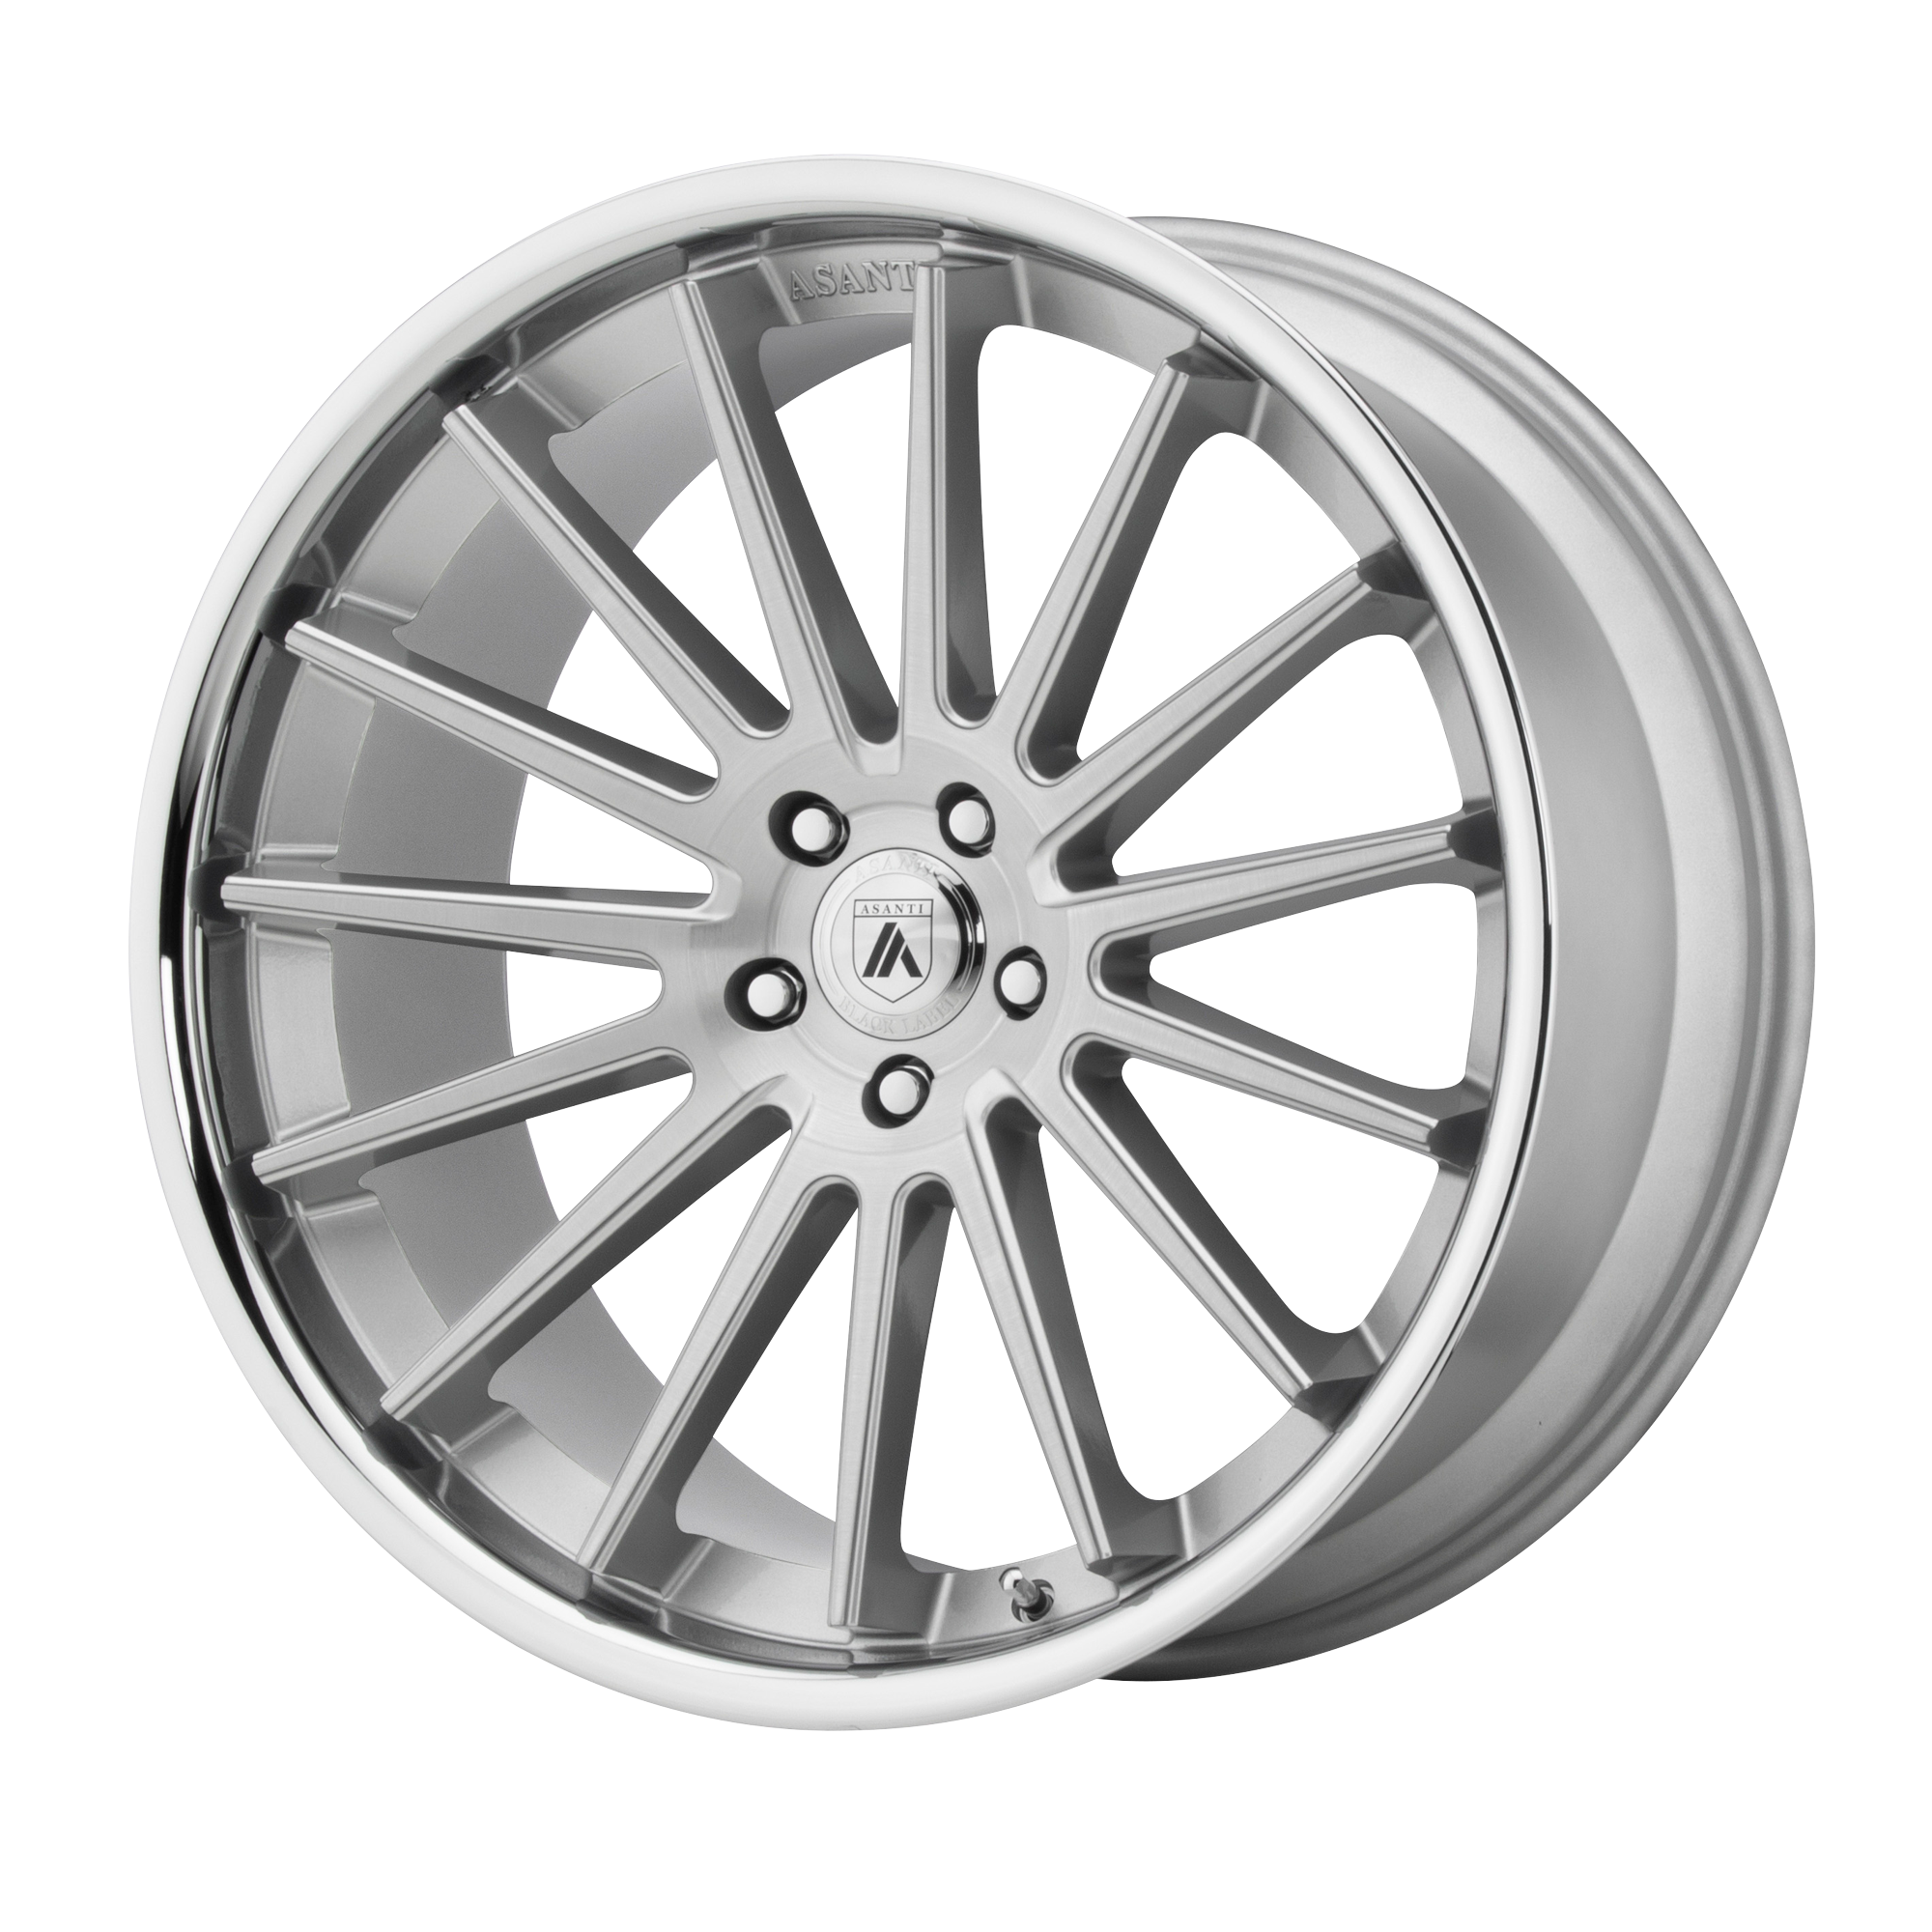 BETA 20x9 Blank BRUSHED SILVER W/ CHROME LIP (15 mm) - Tires and Engine Performance